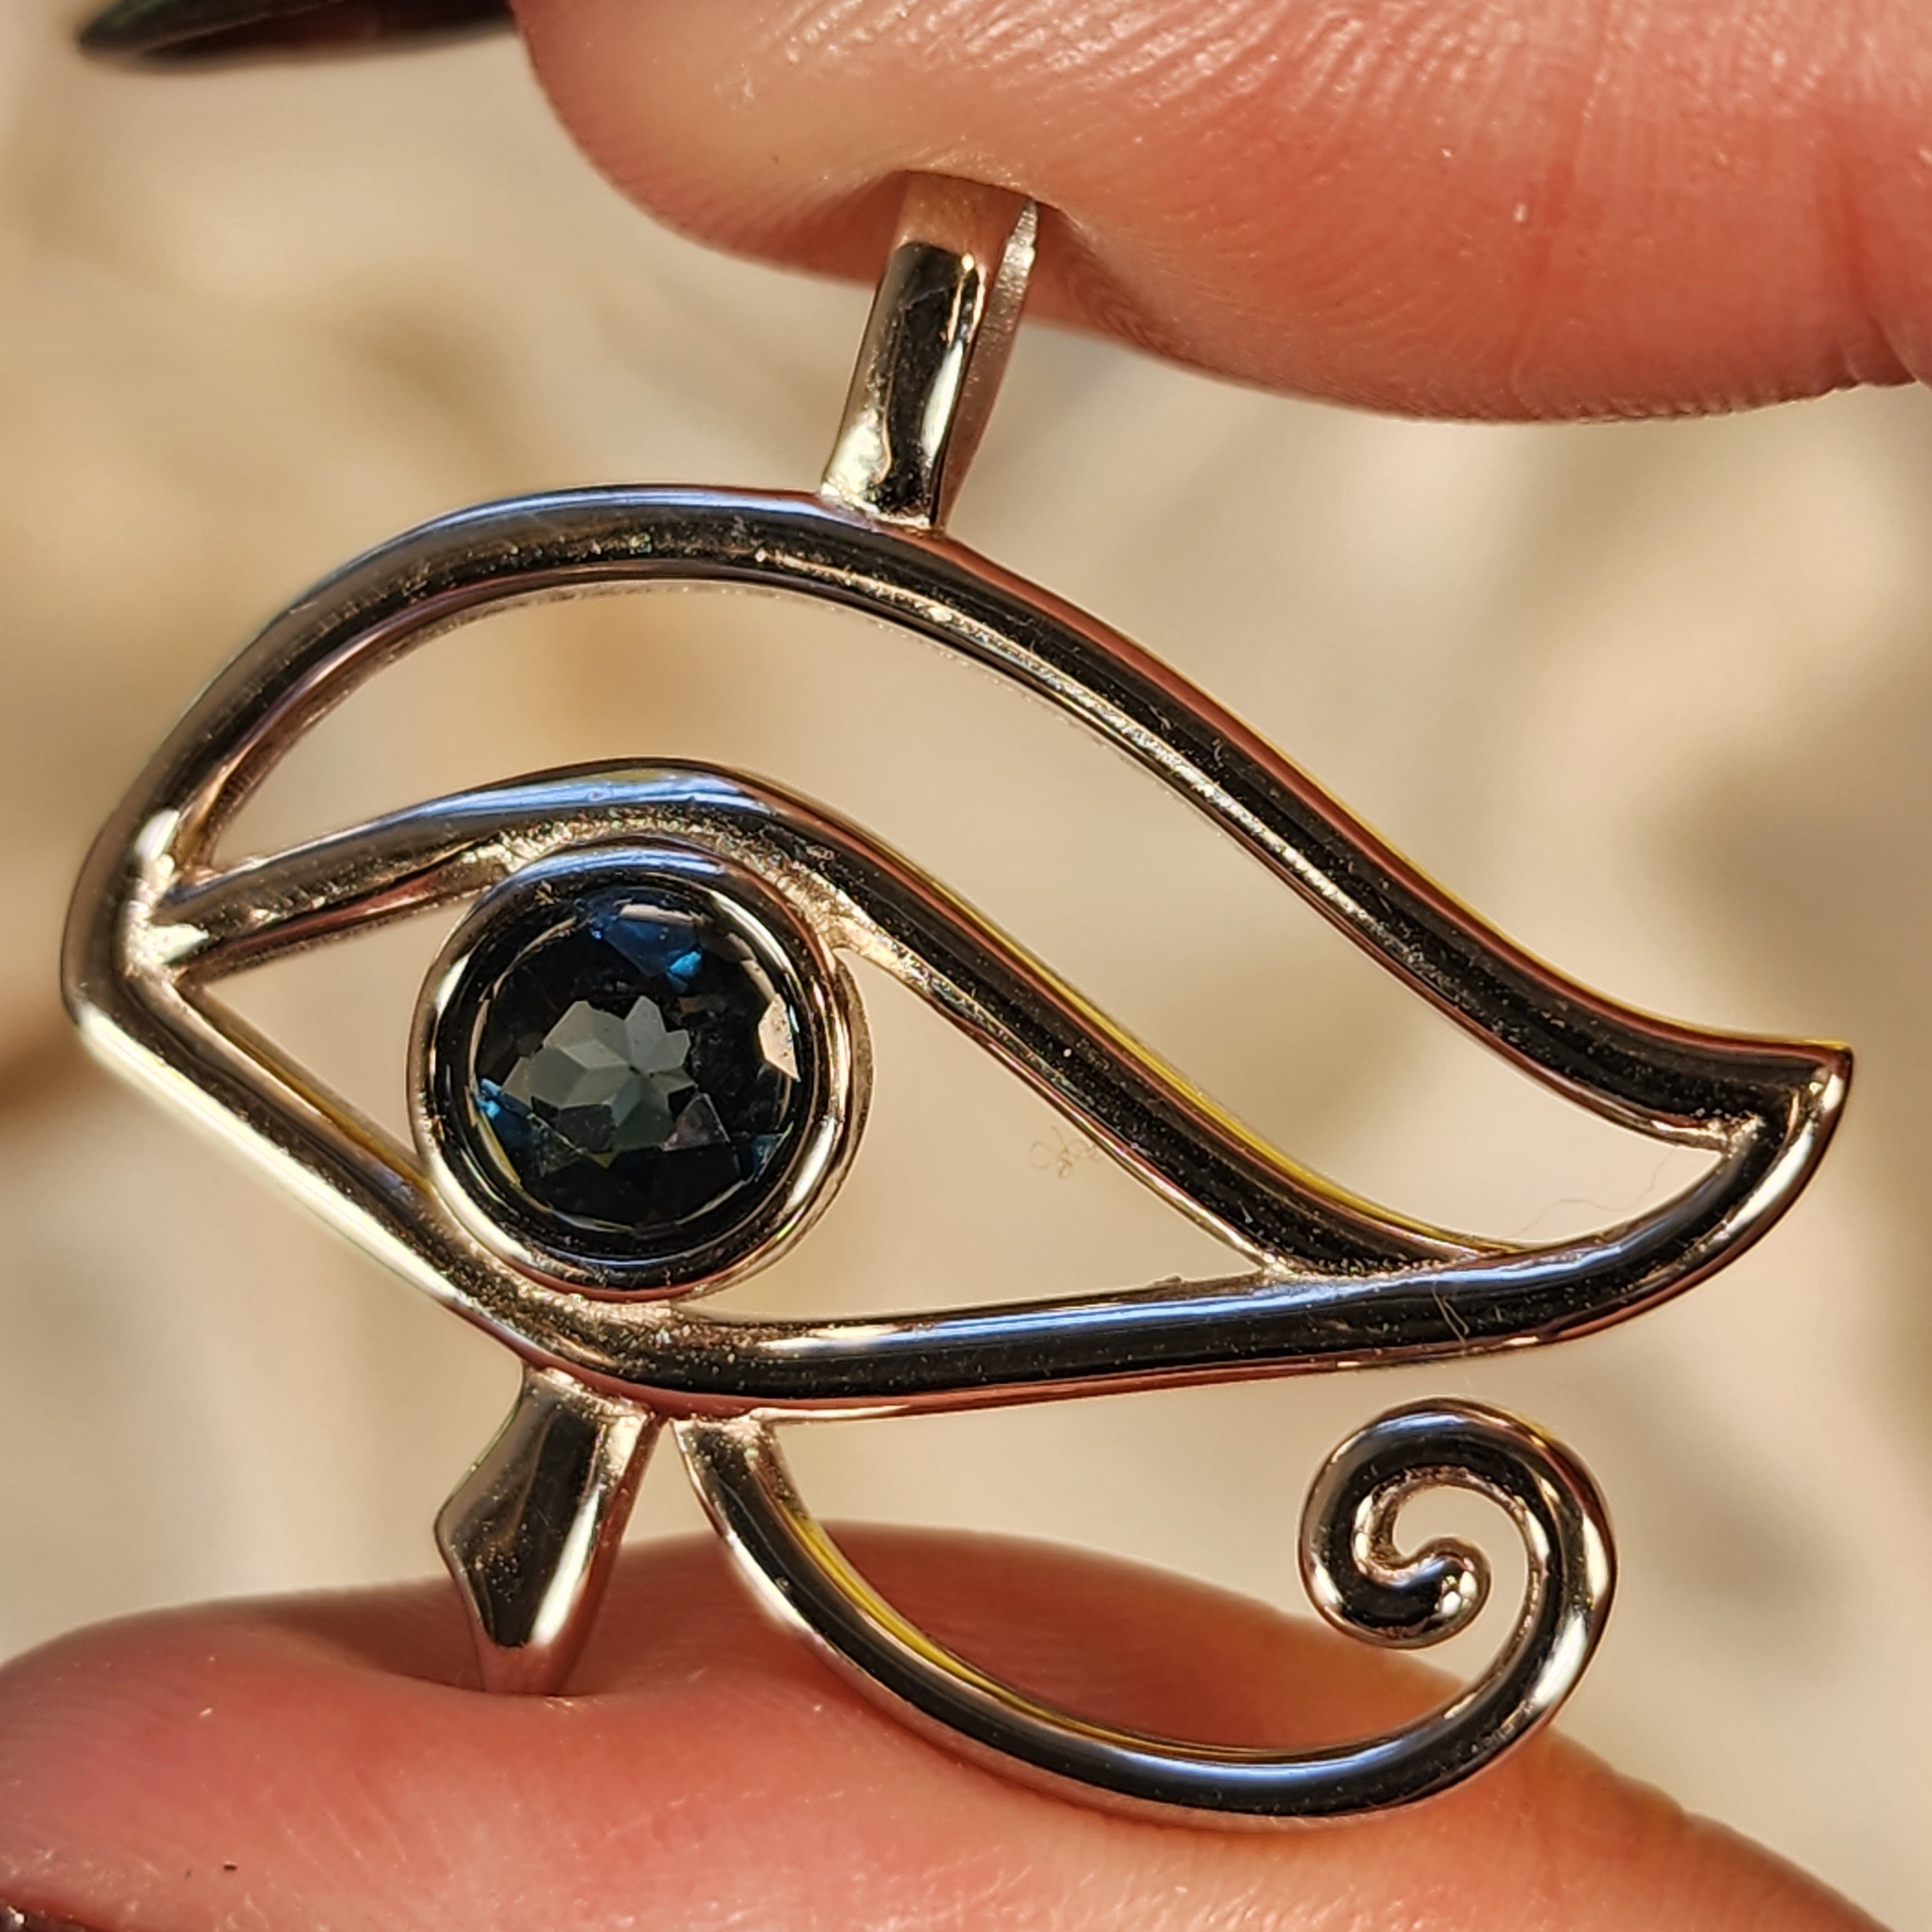 London Blue Topaz Eye of Horus Amulet Pendant .925 Silver for Esoteric Wisdom, Communication with Spirit Guides and Peace